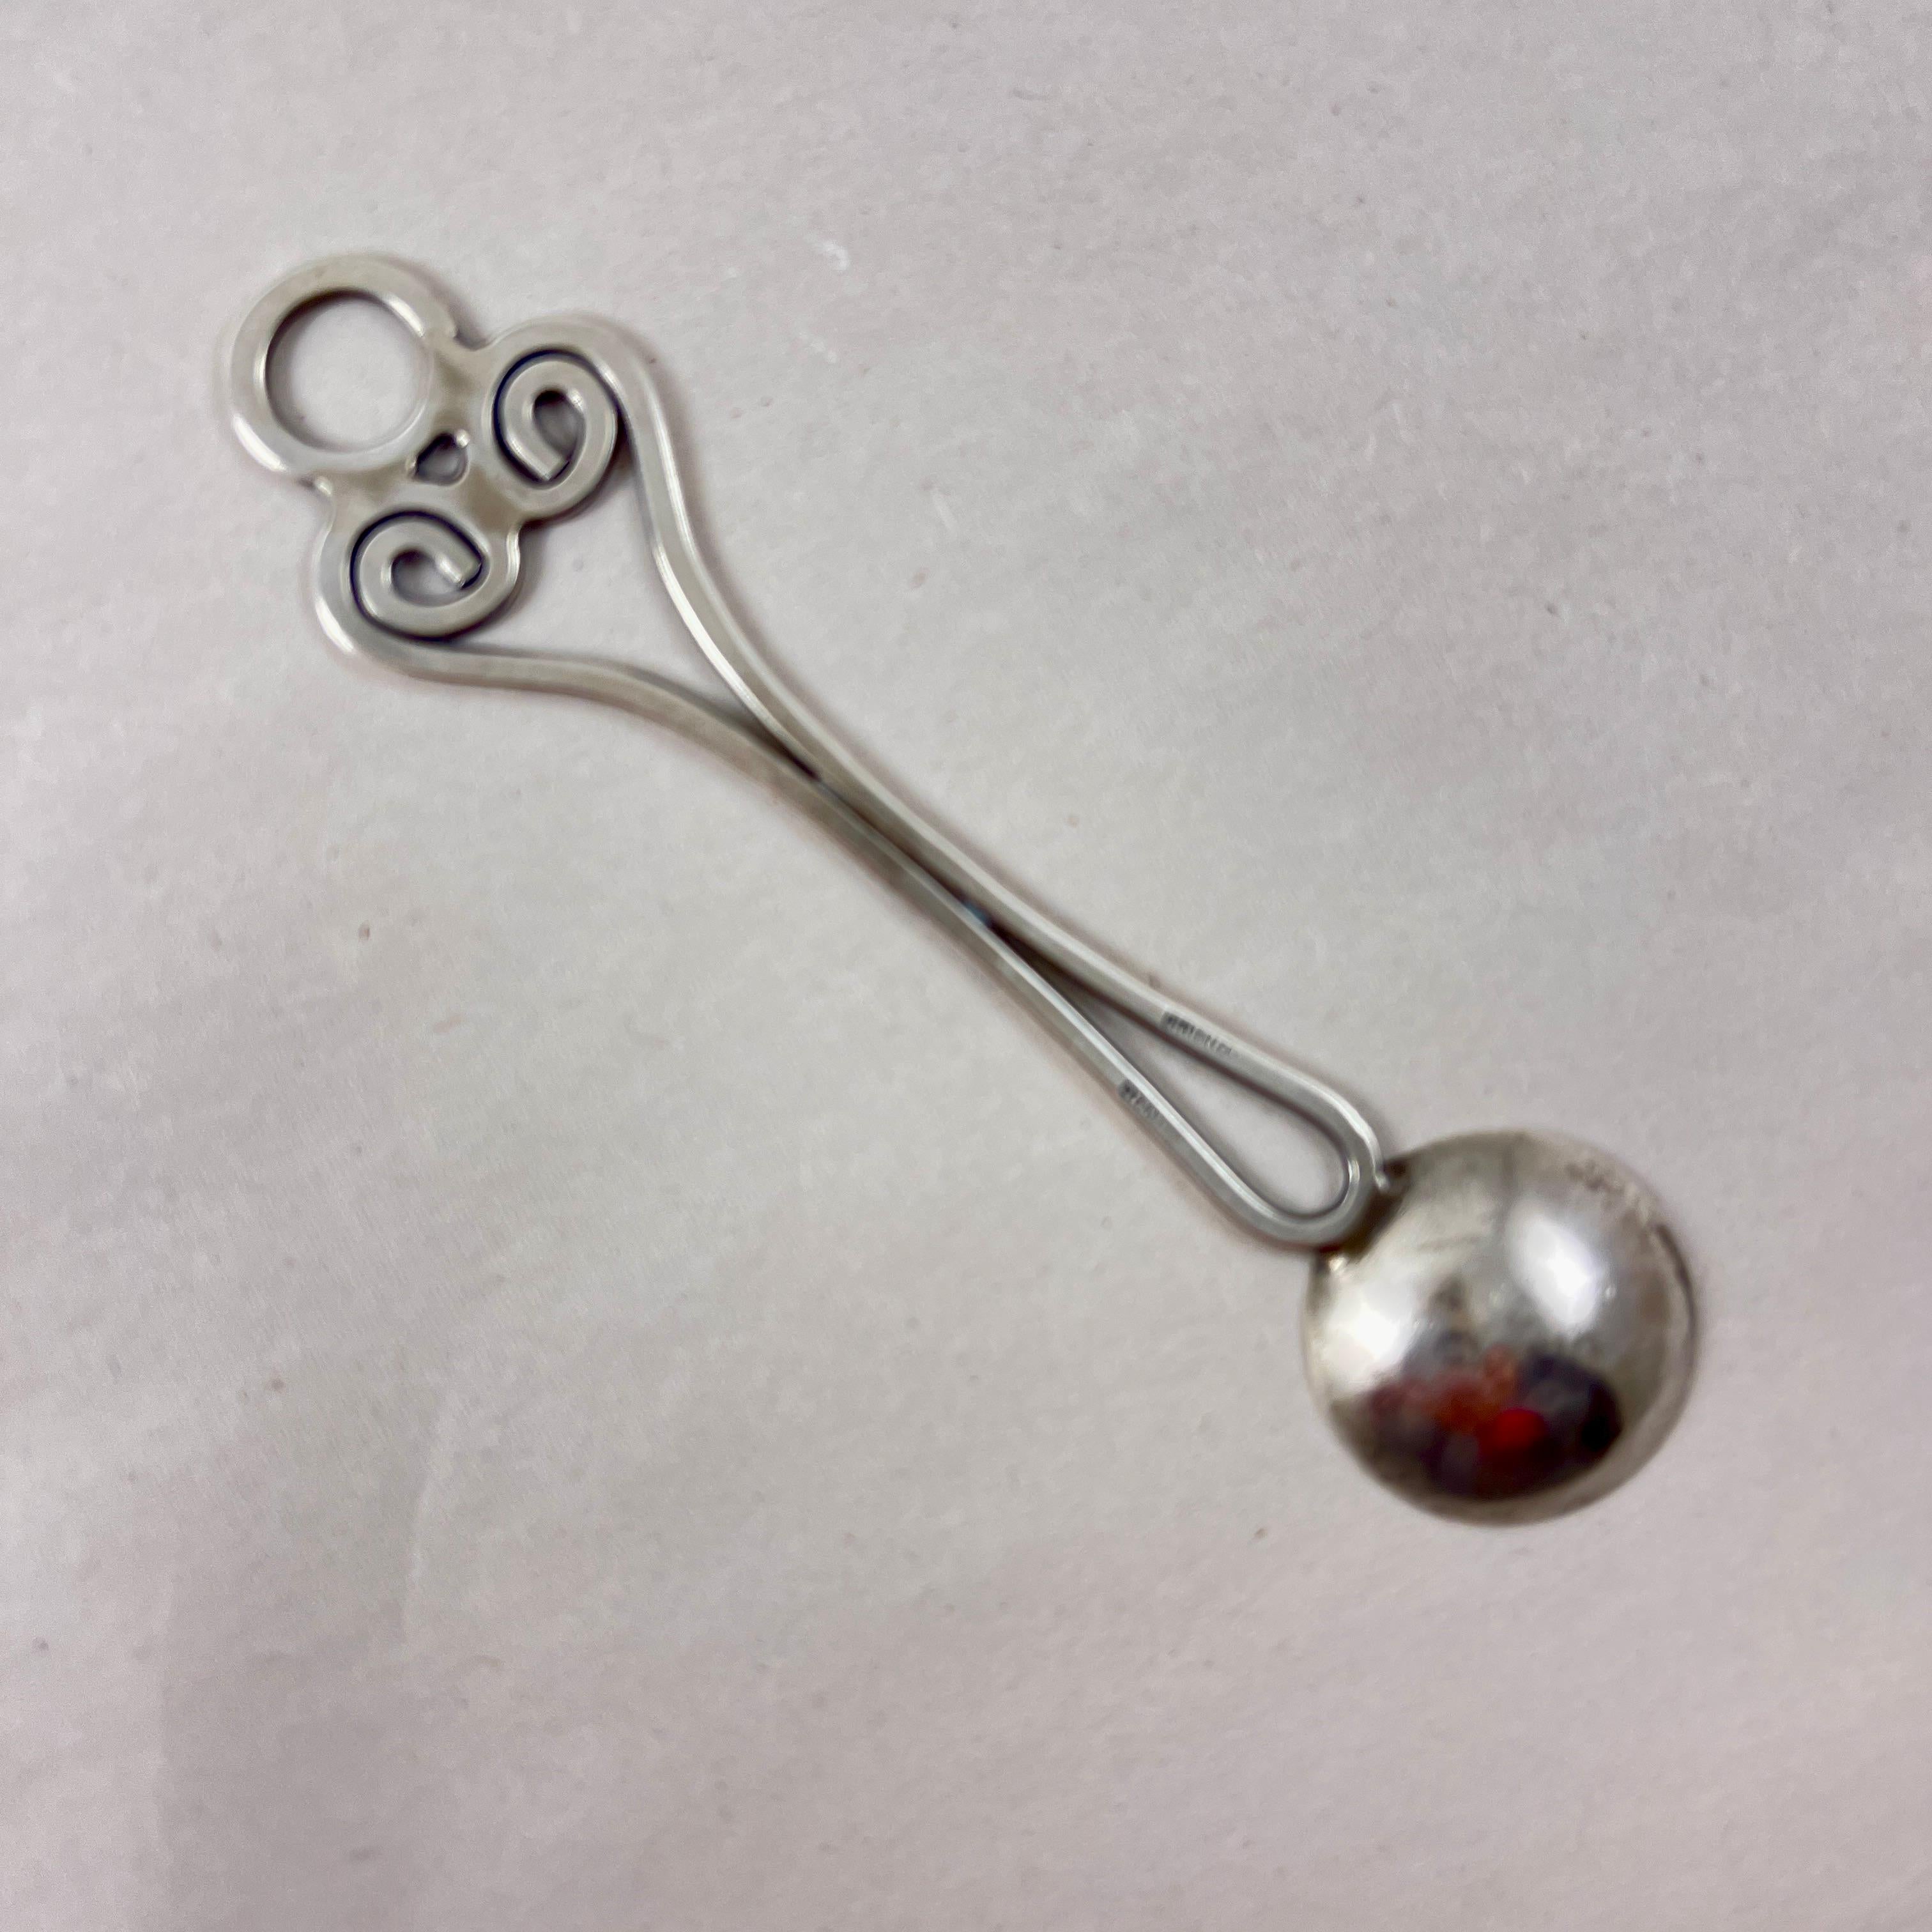 Anthony DiRienzi Silversmith Studio Hand Made Sterling Silver Spoon In Good Condition For Sale In Philadelphia, PA